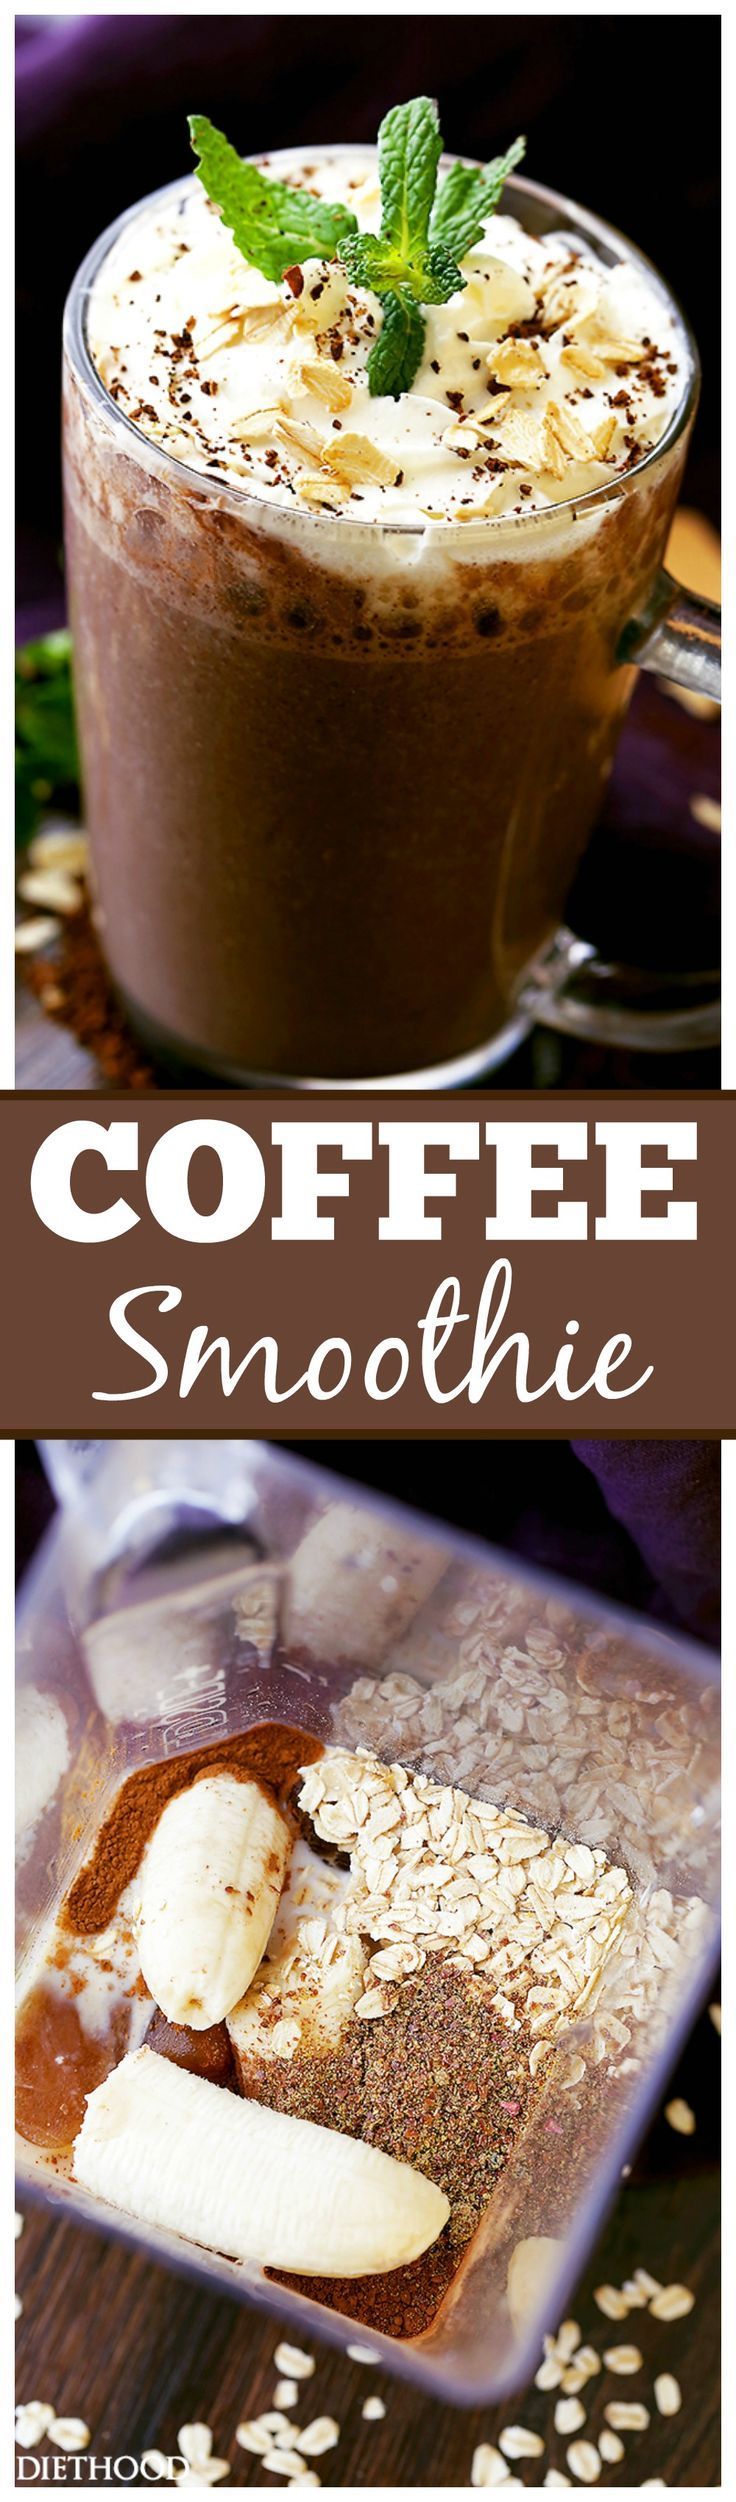 Coffee Smoothie – The perfect way to start your morning with coffee, oats, flaxseeds and bananas, all in one! Combining our two